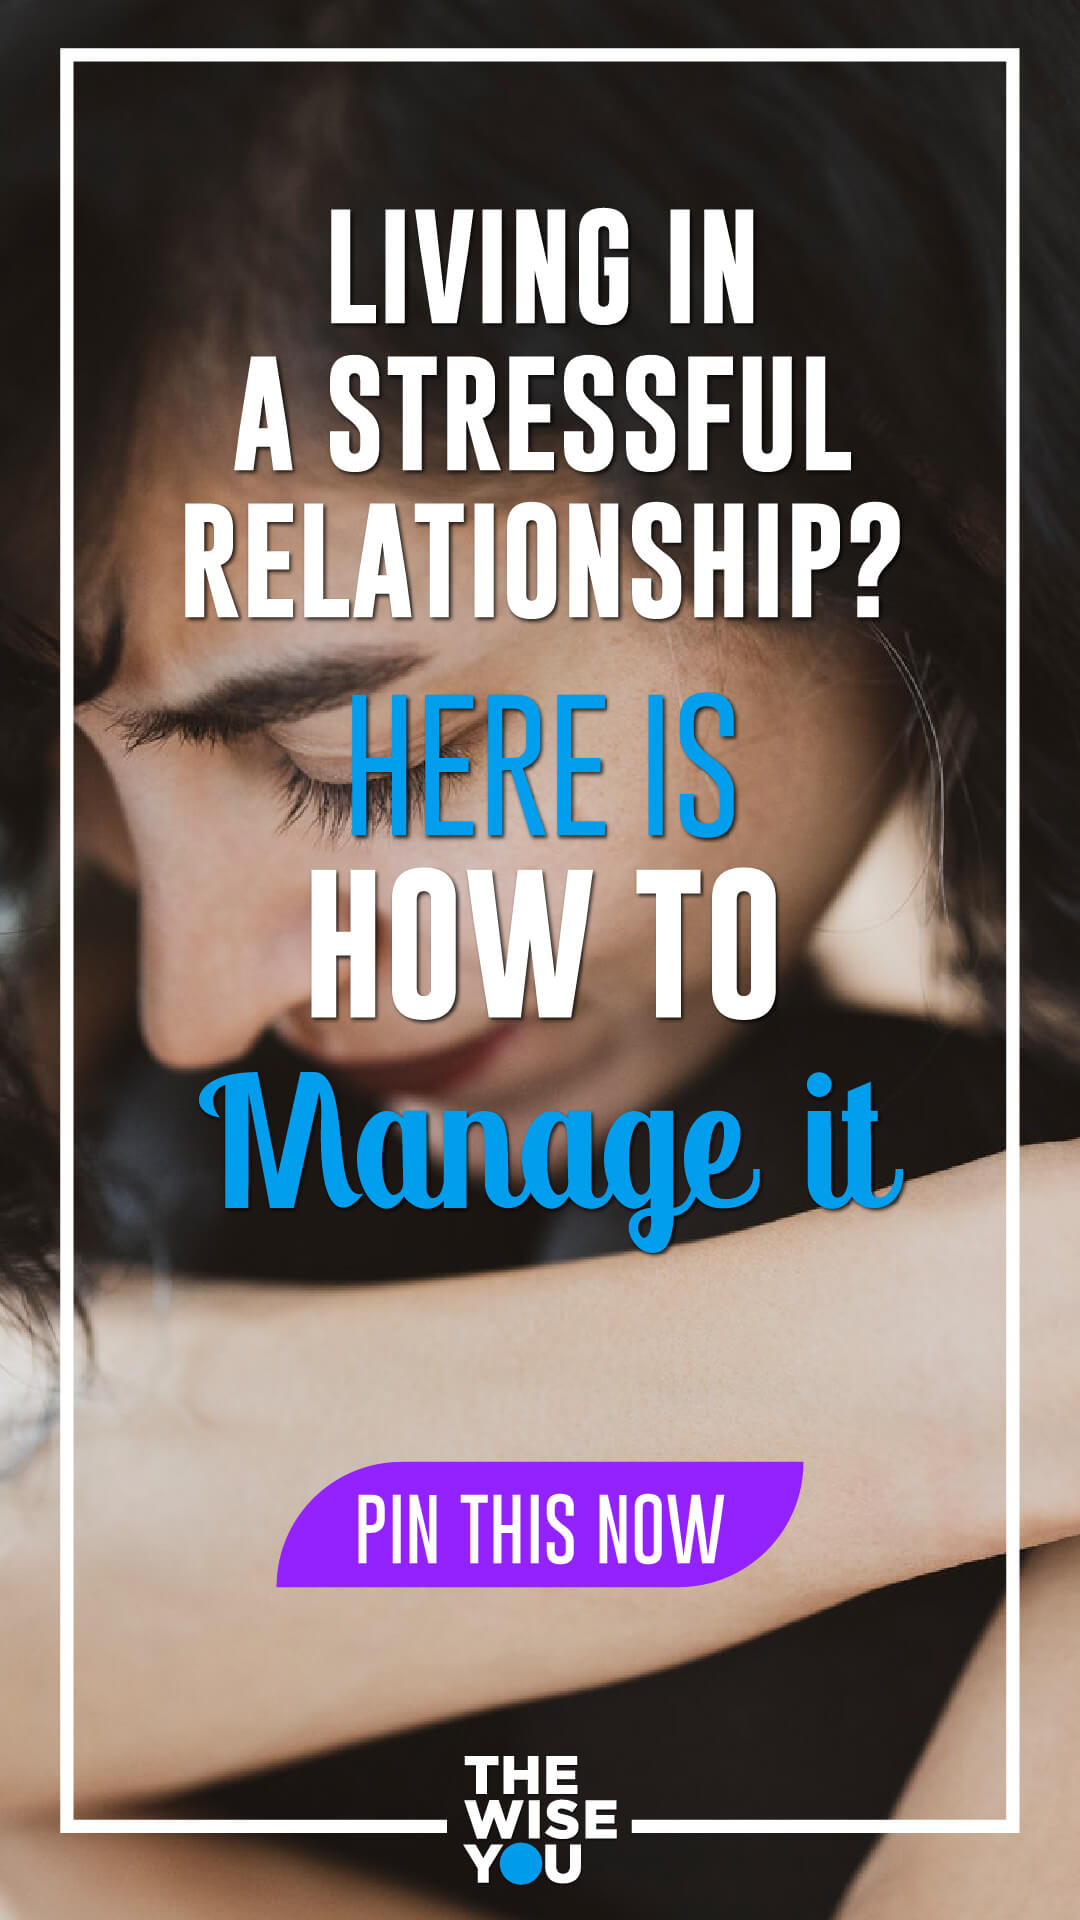 Living in a Stressful Relationship? Here is How to Manage it